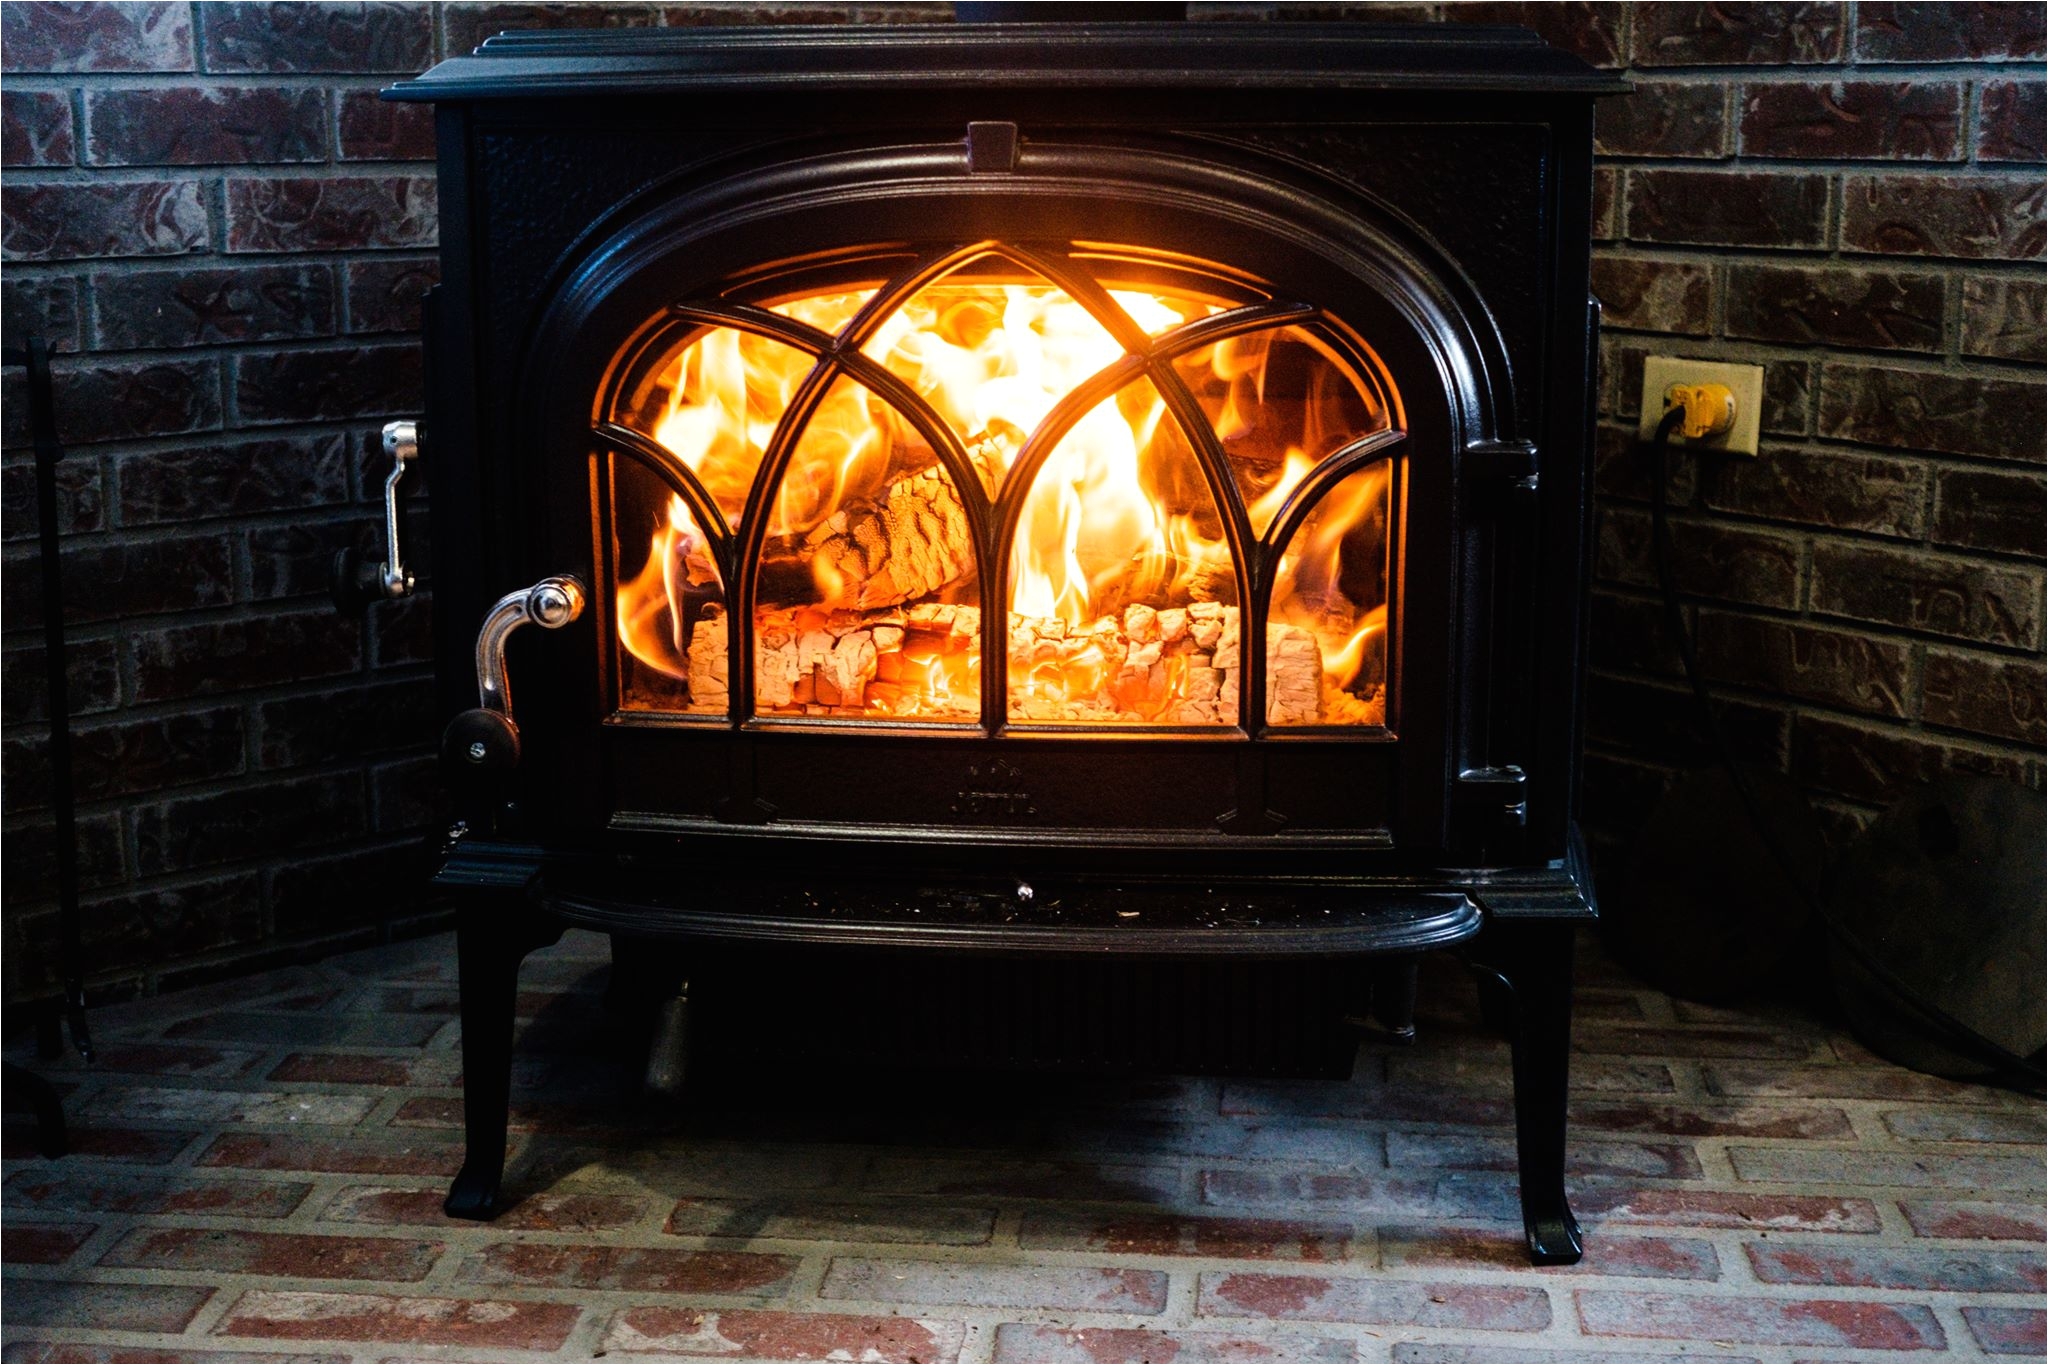 Propane Fireplace Repair Nanaimo Classic Stoves Fireplaces Heat is Our Thing